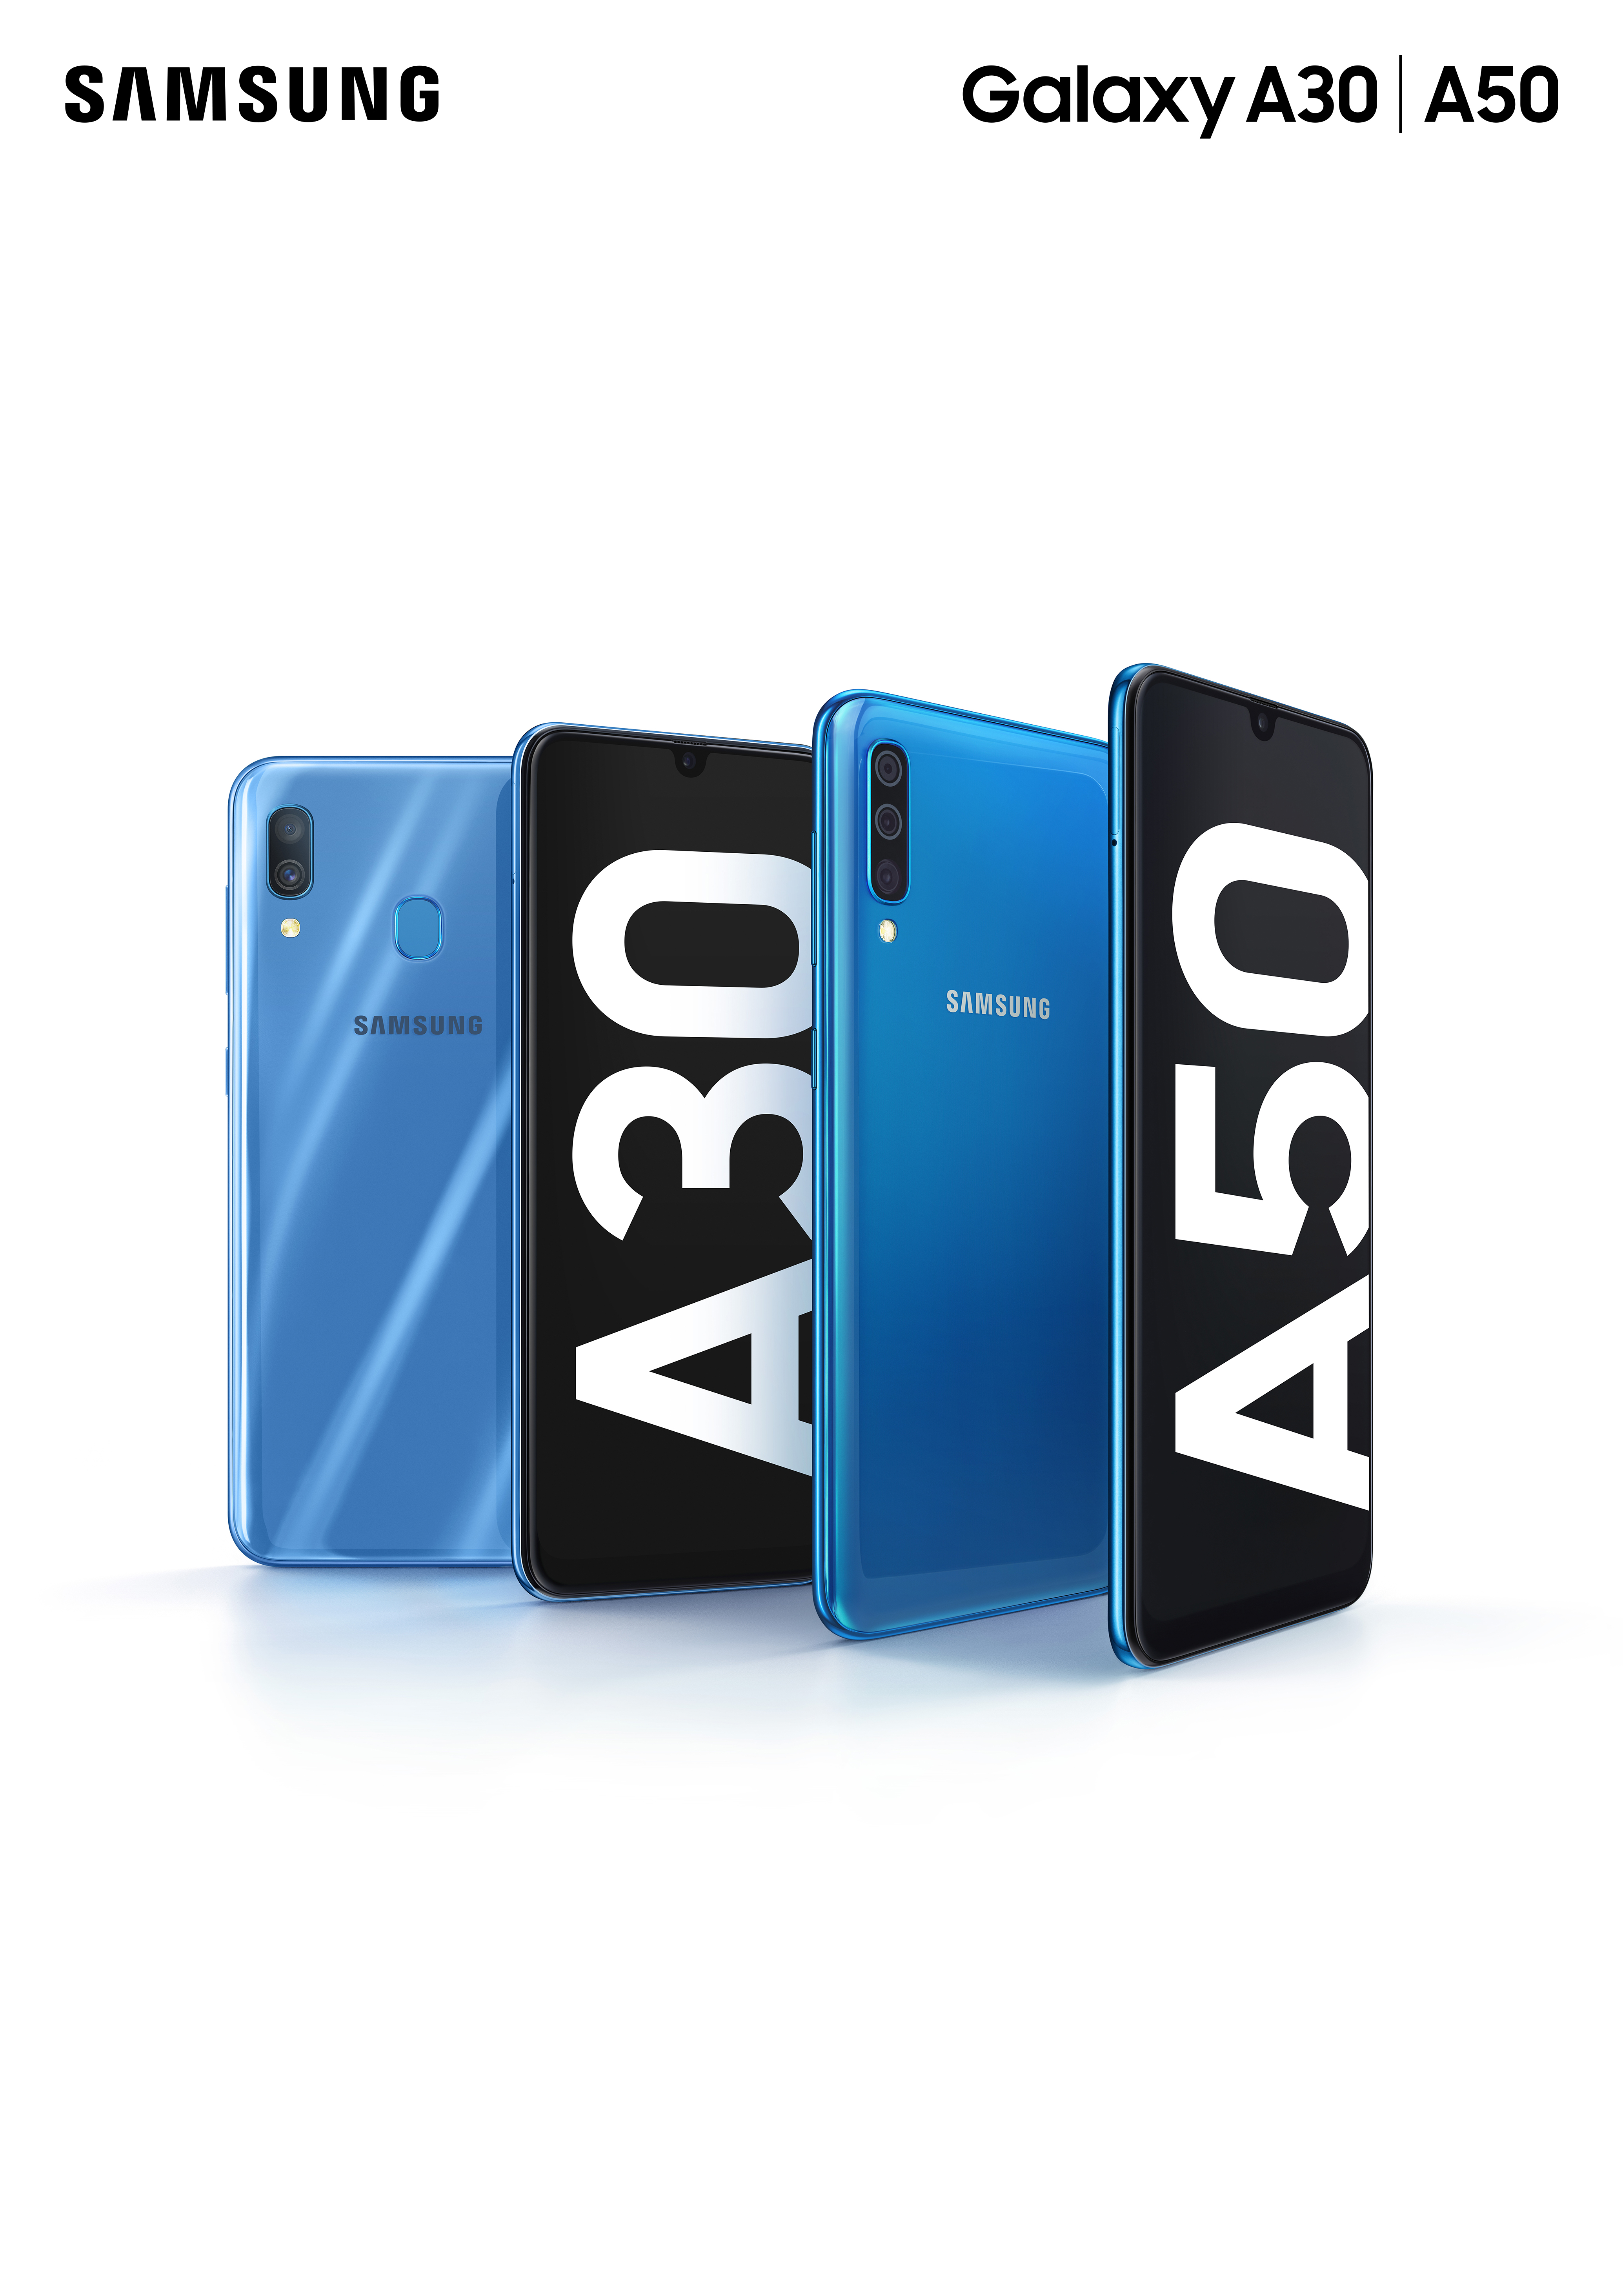 Samsung unveils the Galaxy A30 and A50 for lovers of sub-premium phones